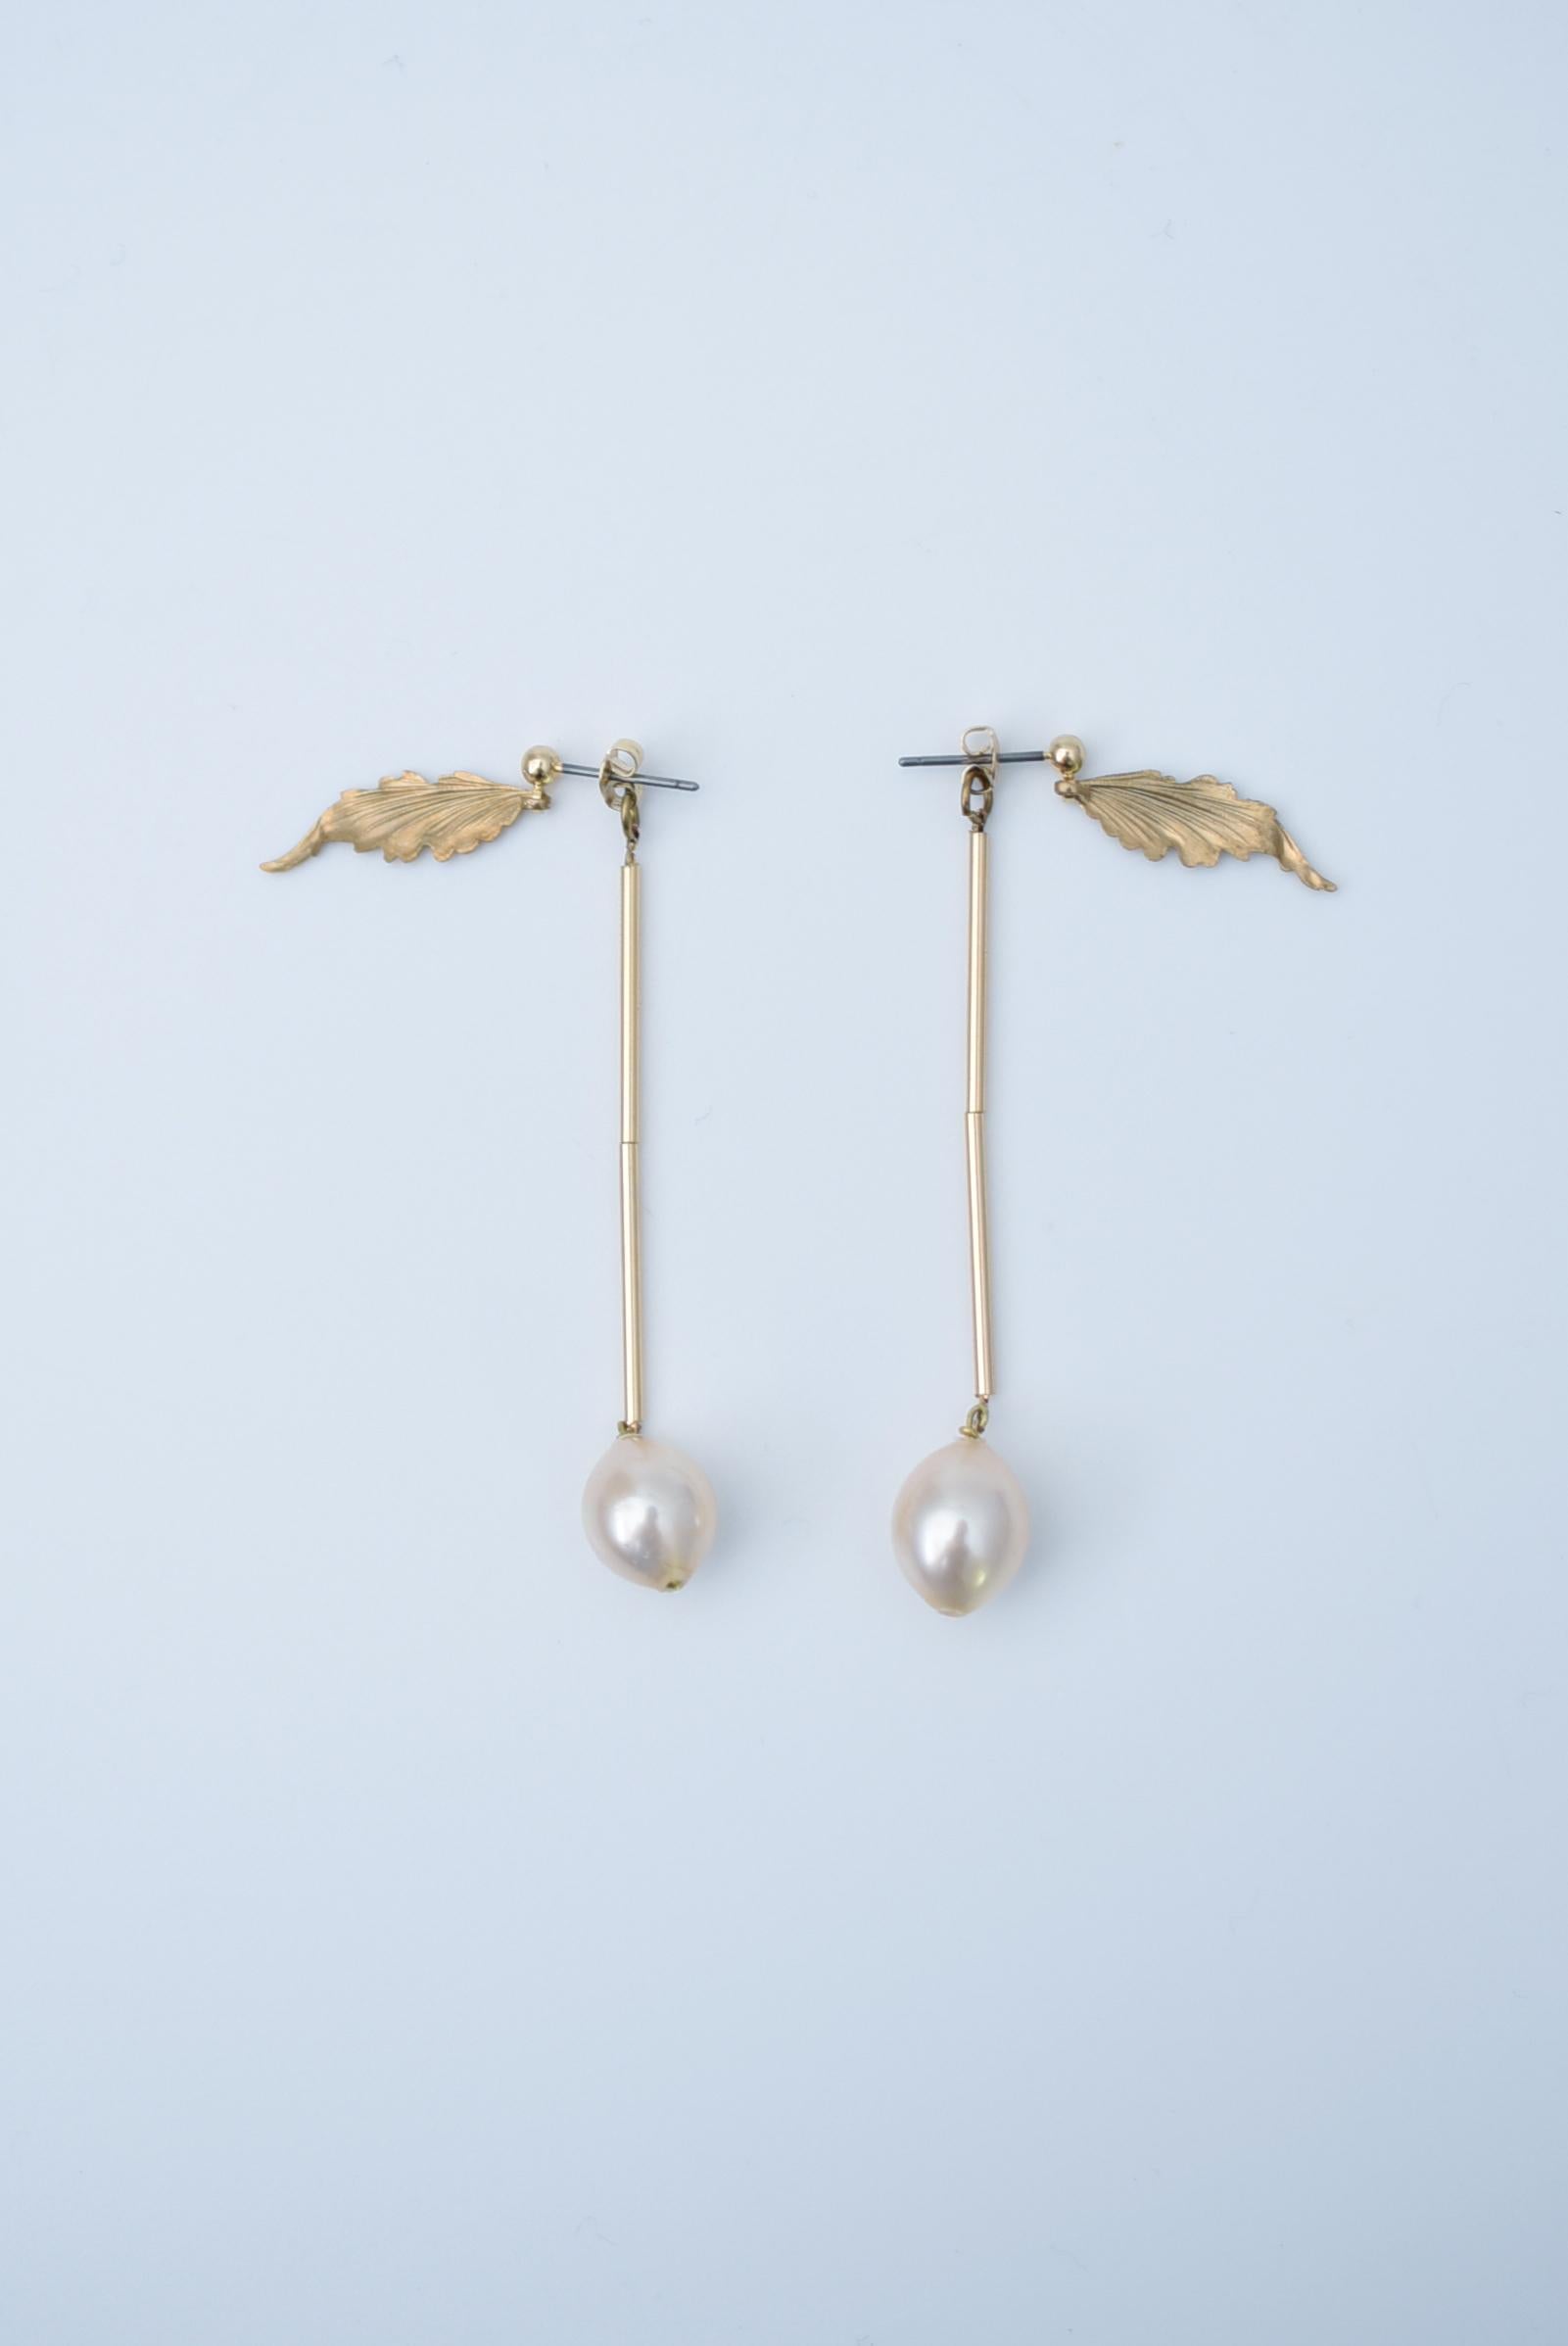 material:Brass, vintage 1960s Japanese glass pearls
size:length 6cm

This series is based on the flower of Scabiosa.
The plump pearls are vintage pearls made in Japan in the 1980s.

Each pearl is hand rolled by a craftsman, so the individual grains